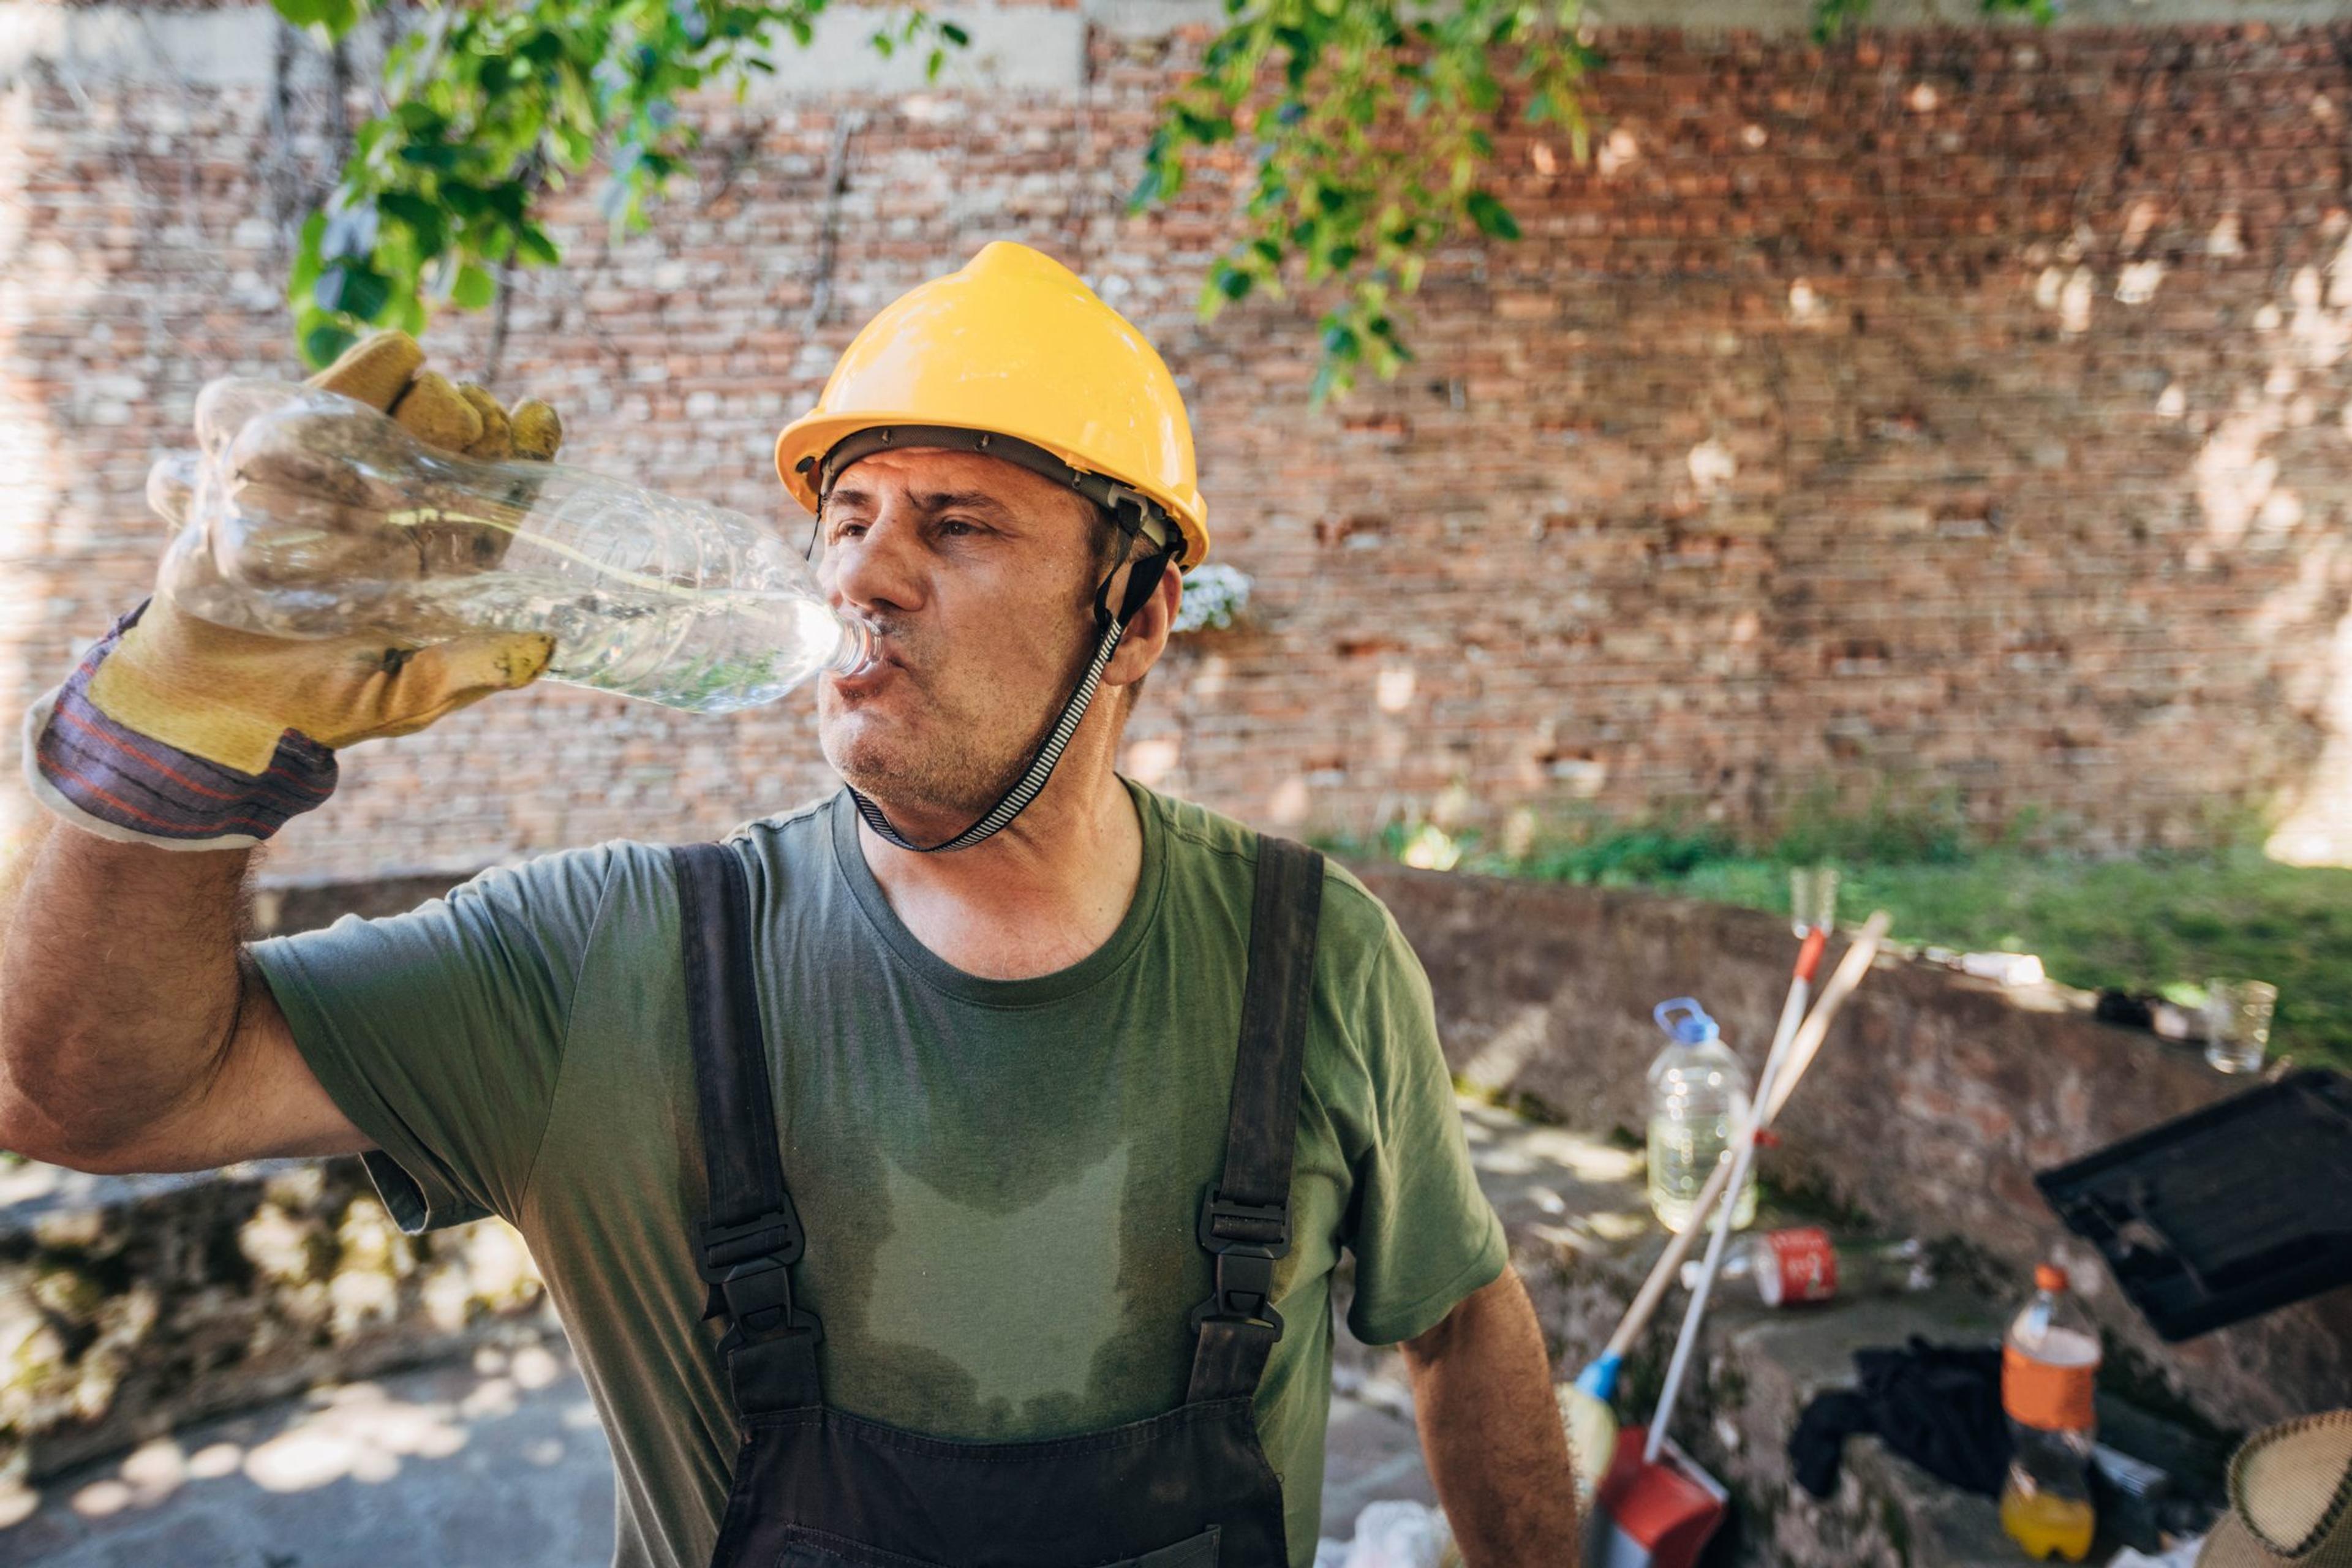 A middle aged construction worker sweating outside with high blood pressure takes a drink of water to cool down in the summer heat and humidity